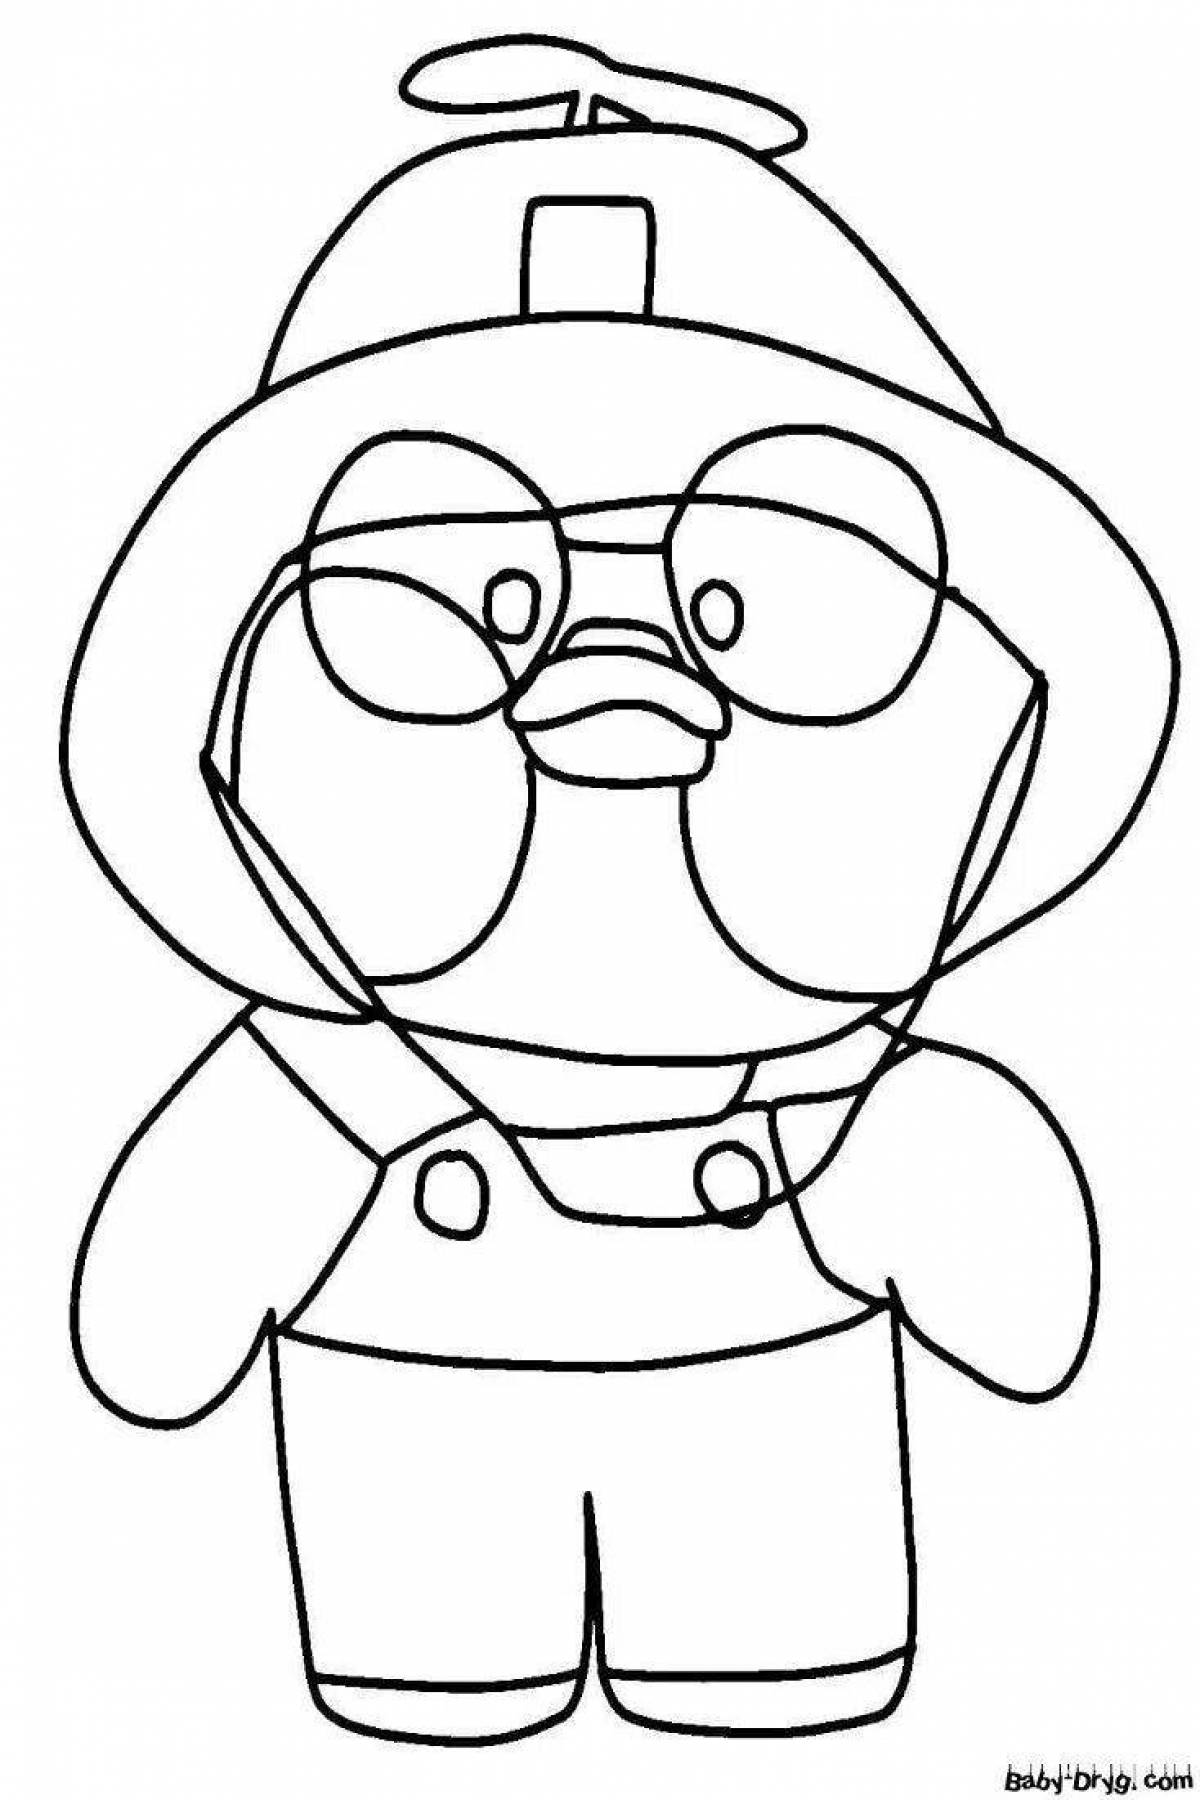 Coloring book shiny duckling - lalafanfan